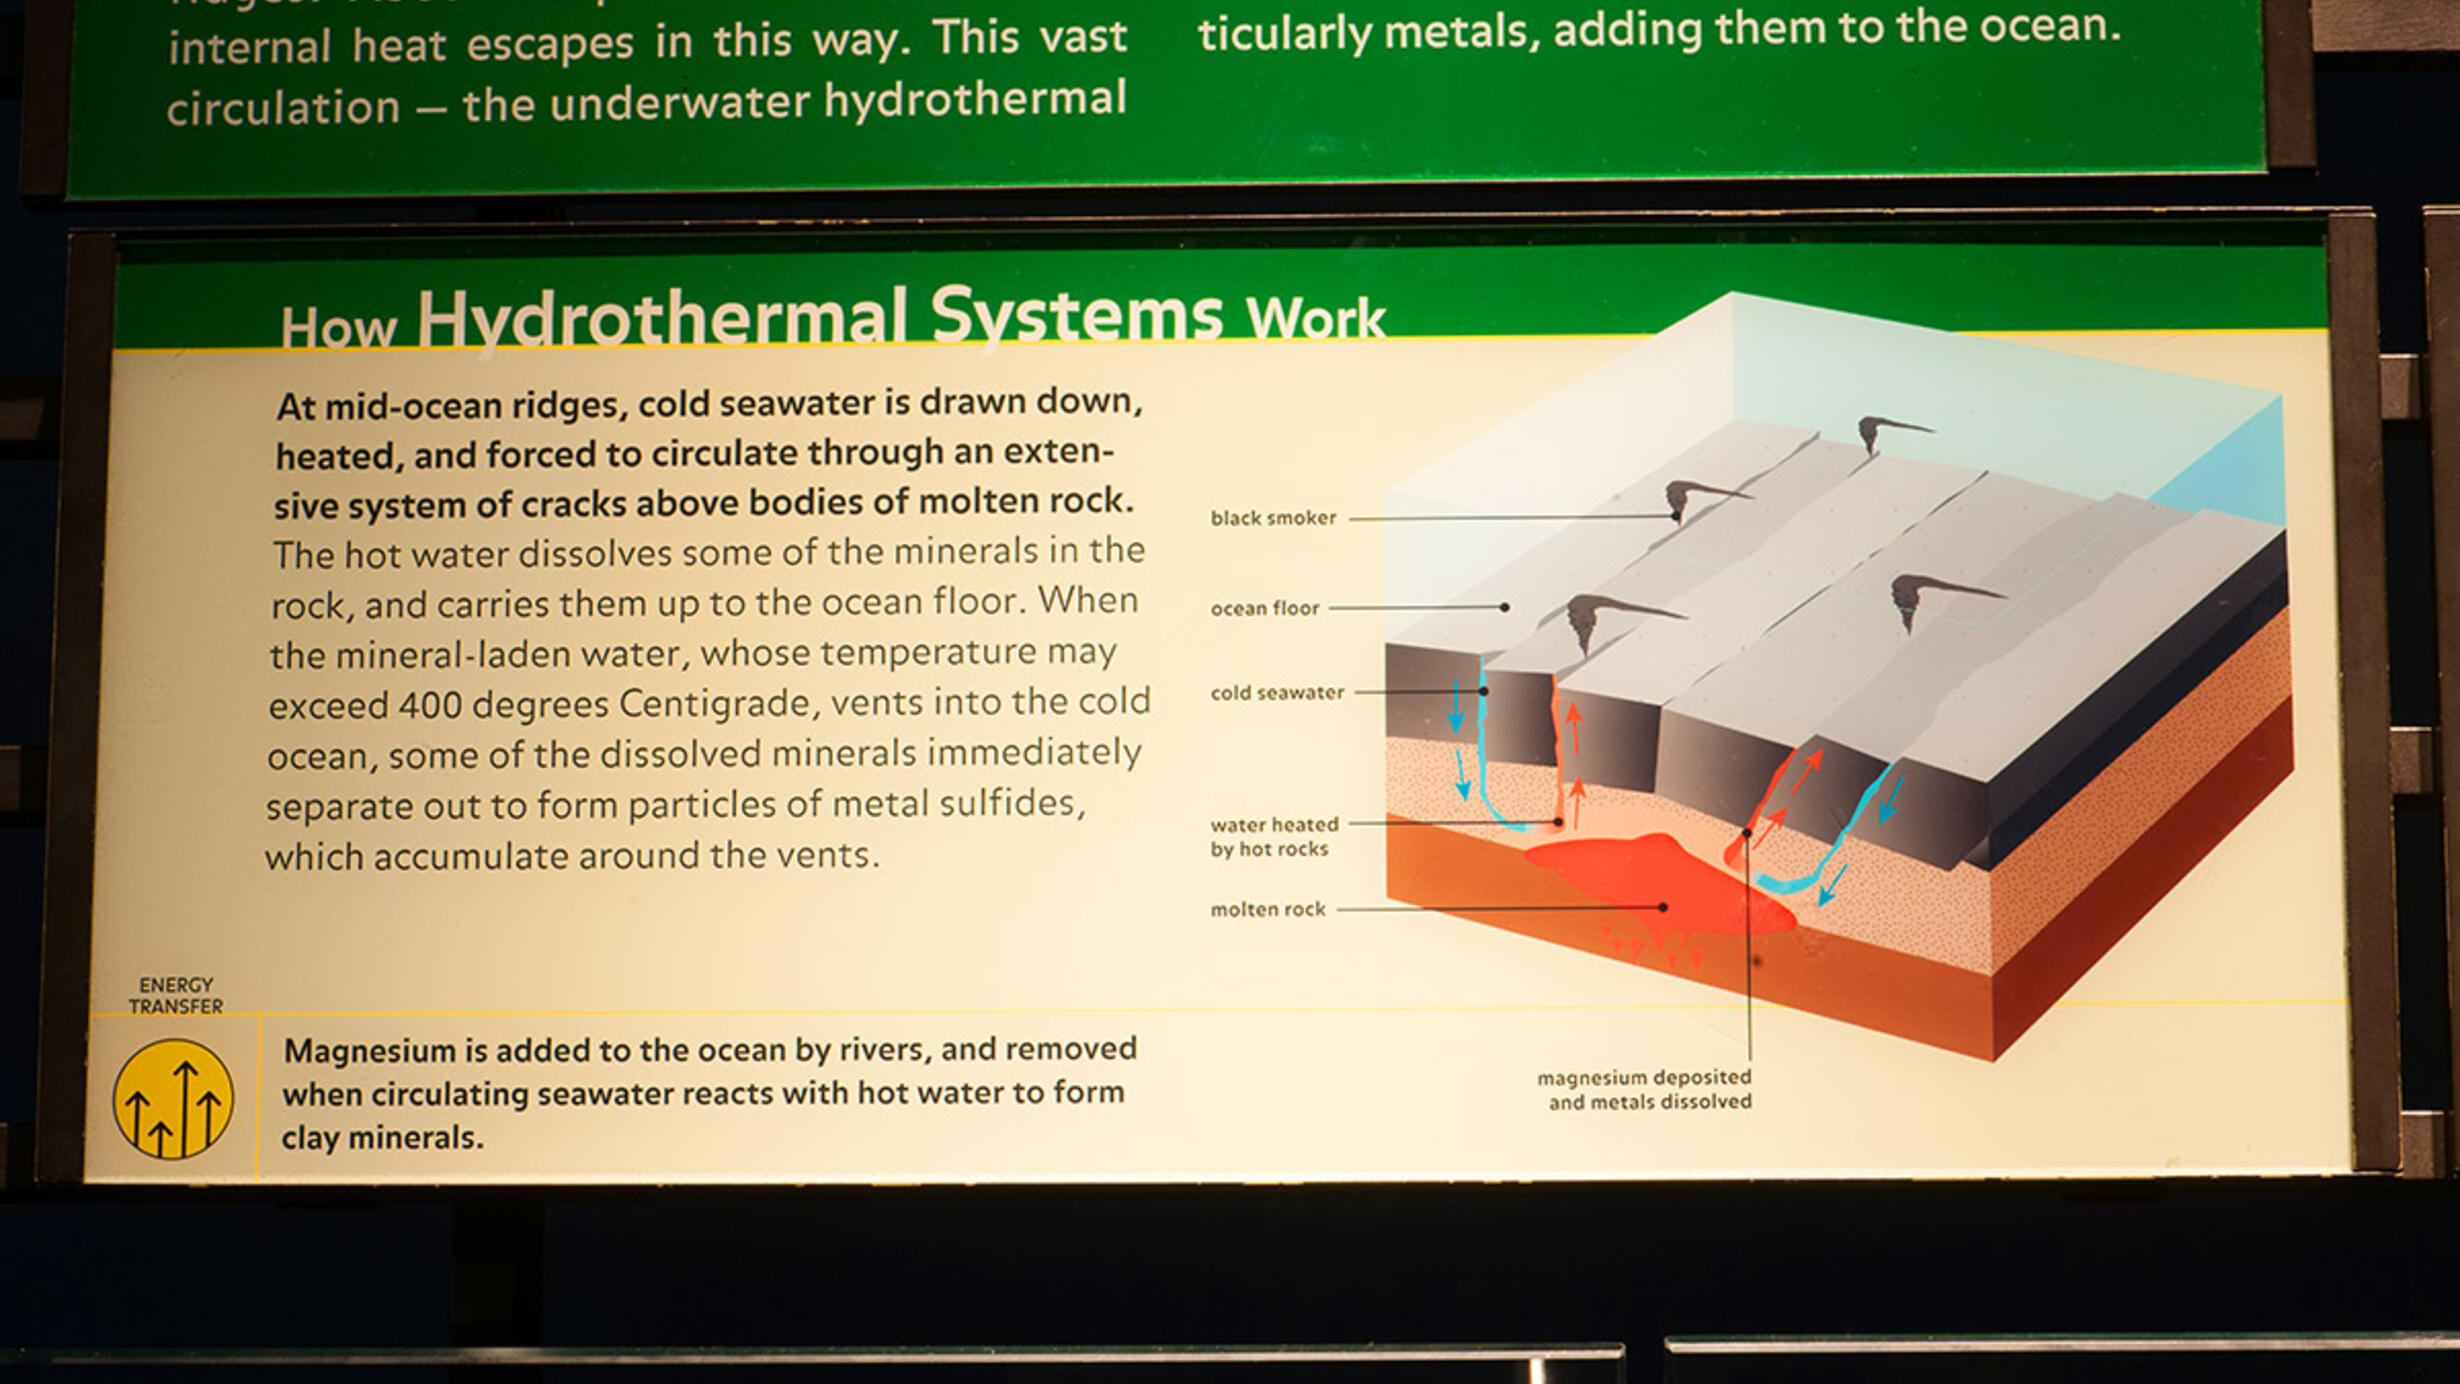 How Do Hydrothermal Systems Work?